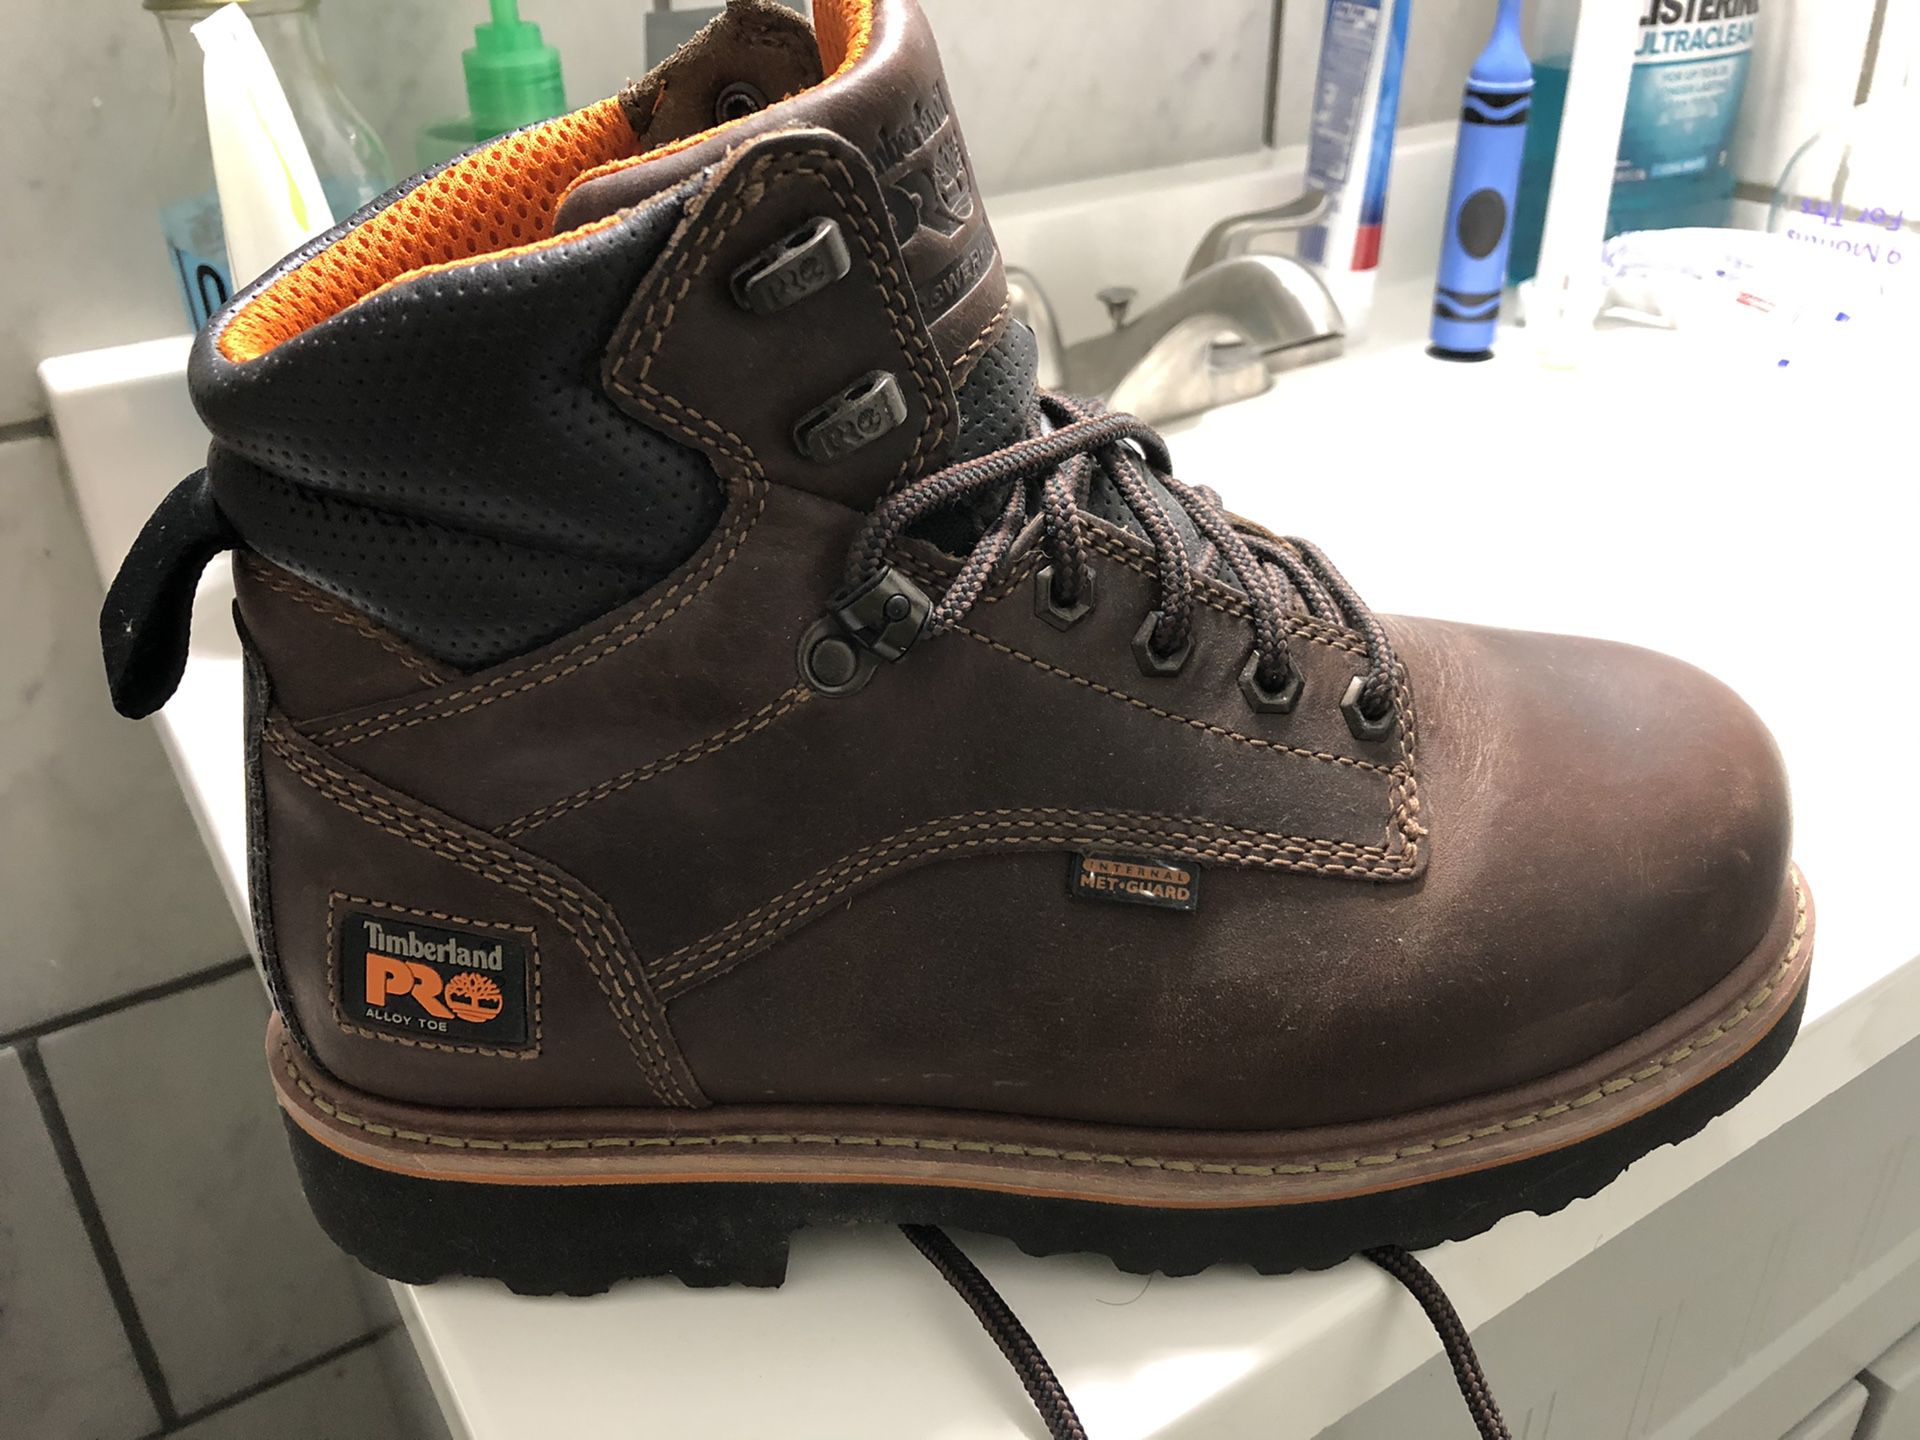 Timberland PRO Alloy toe work boots size 8